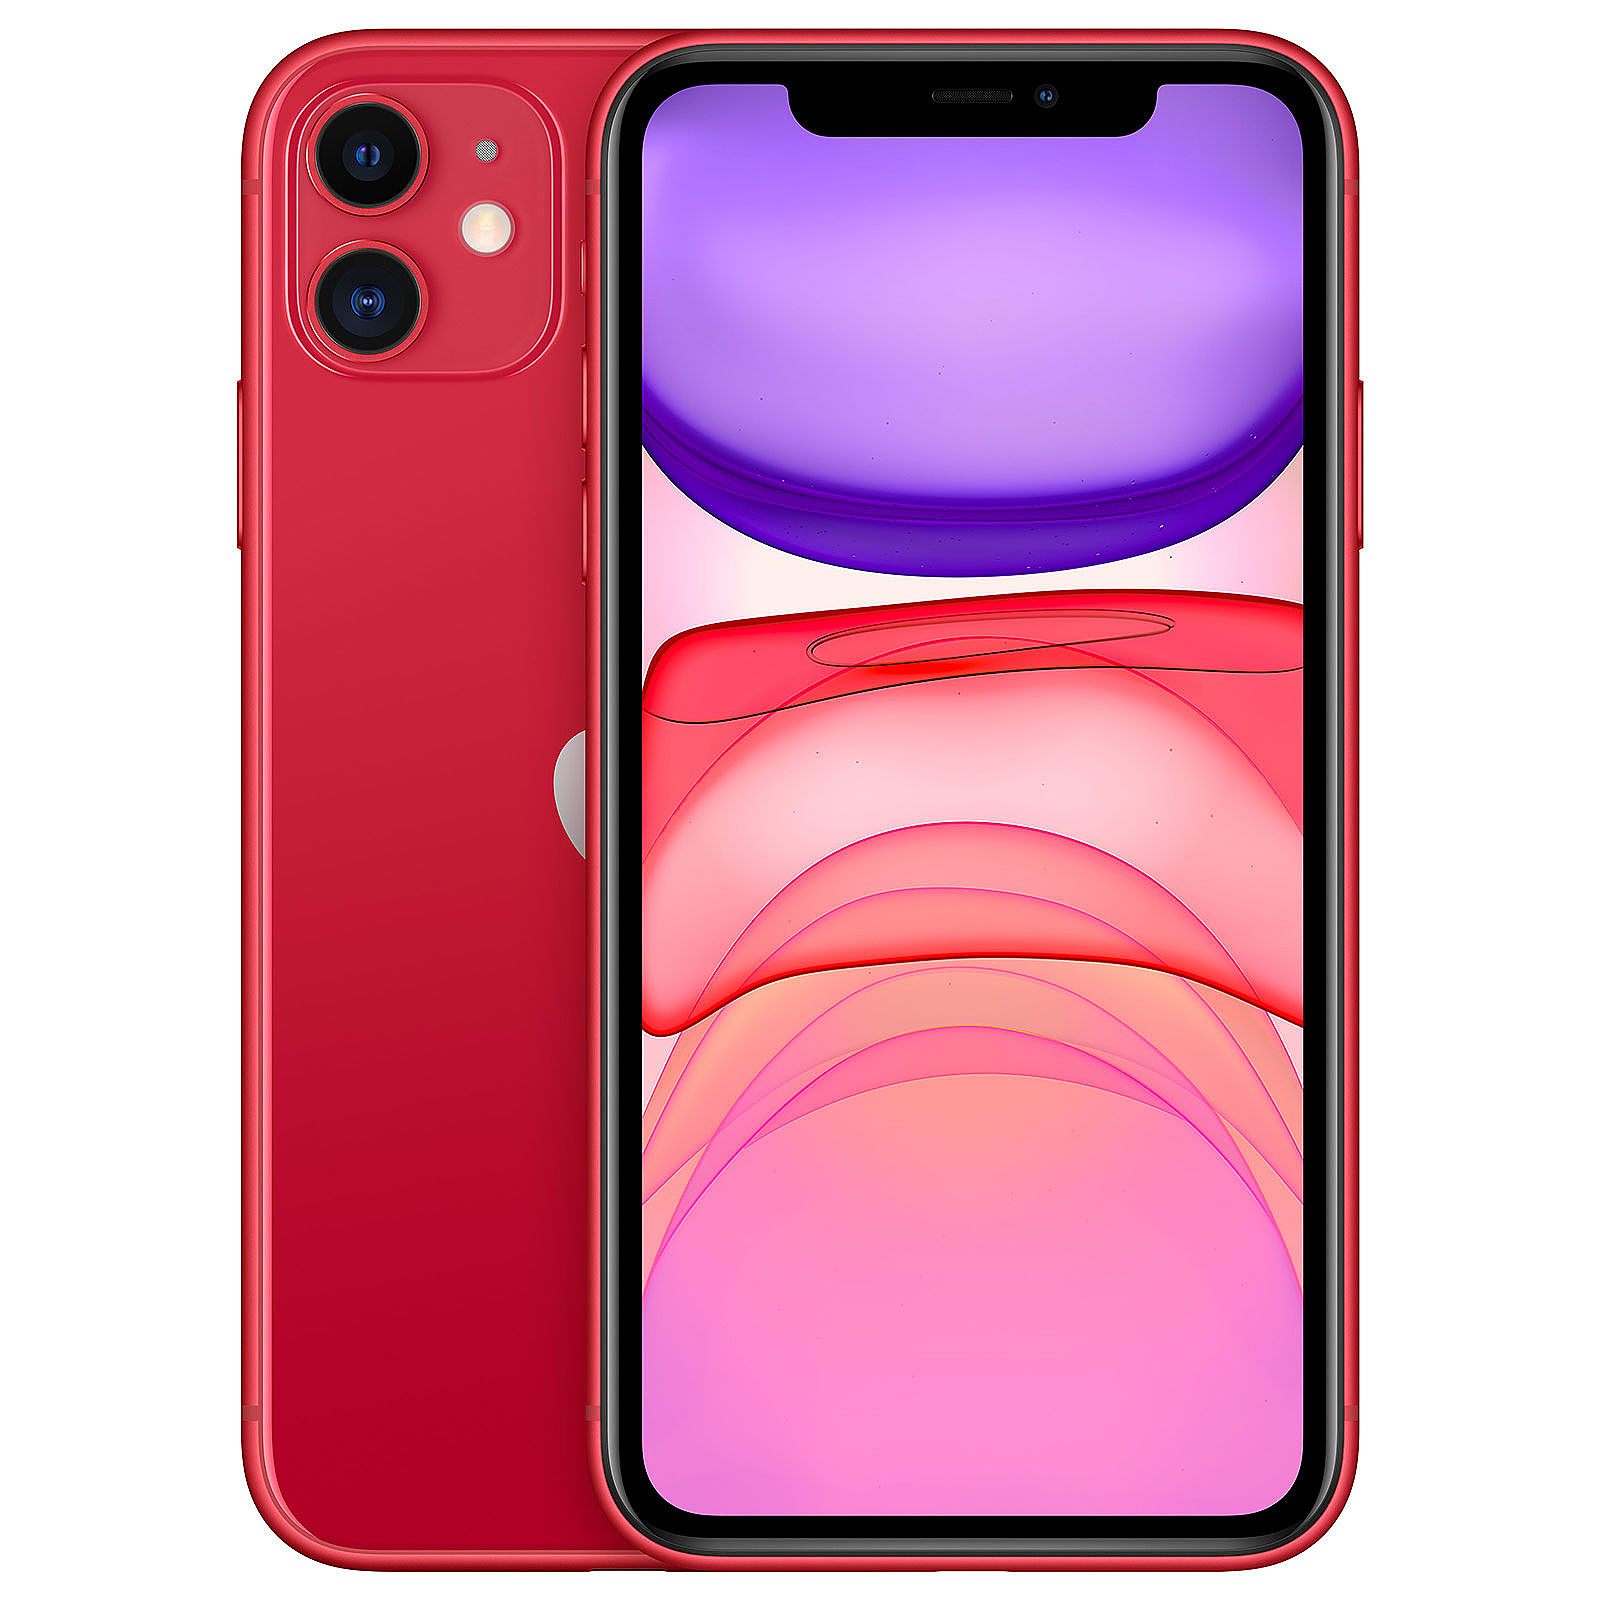 Apple iPhone 11 128 Go (PRODUCT)RED - Mobile & smartphone Apple